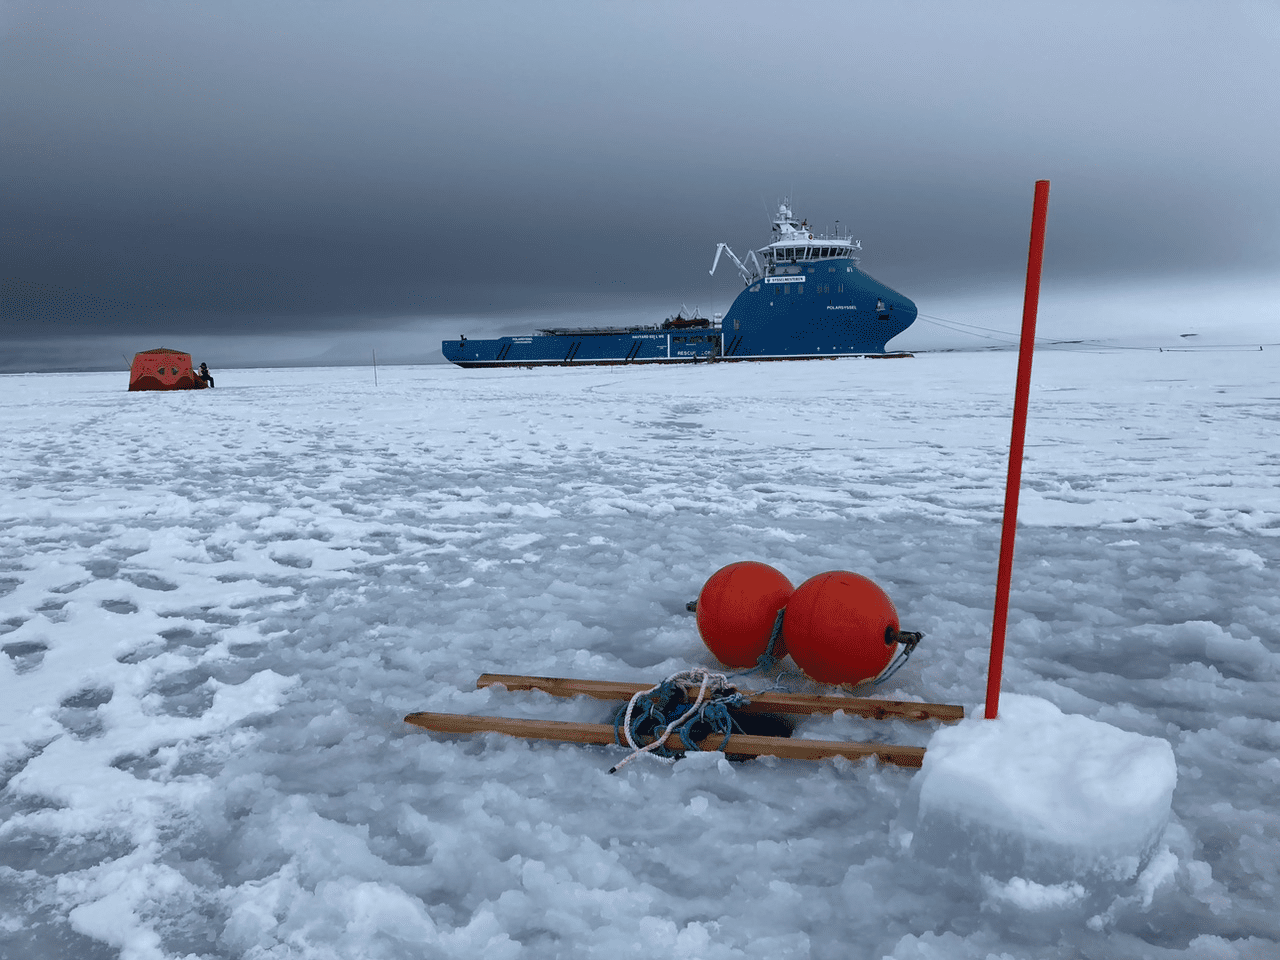 Instruments in the ice